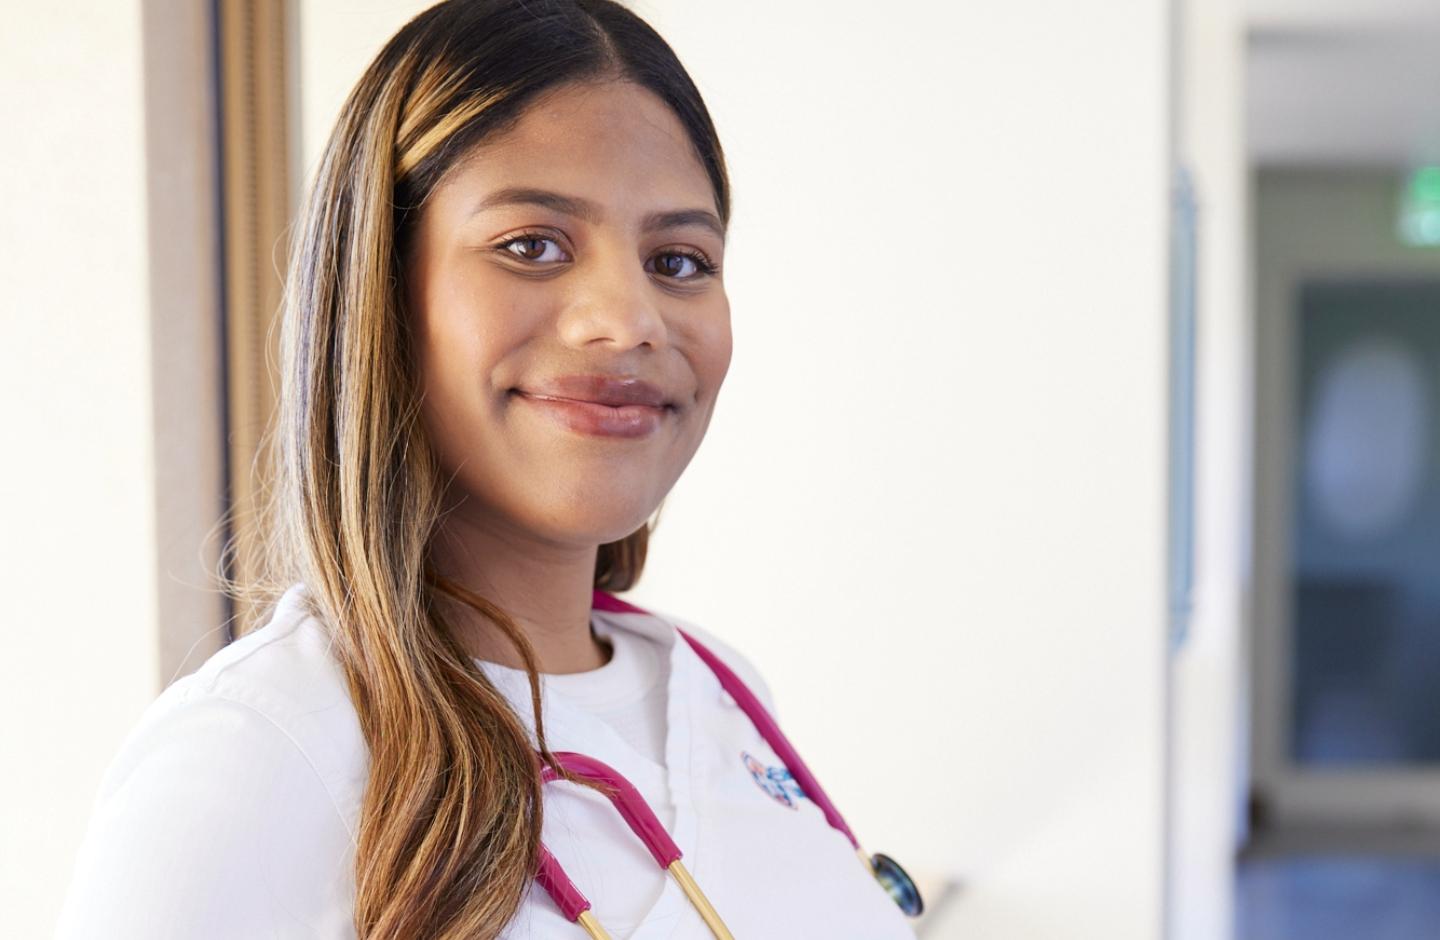 Nurse with stethoscope smiling and looking at camera